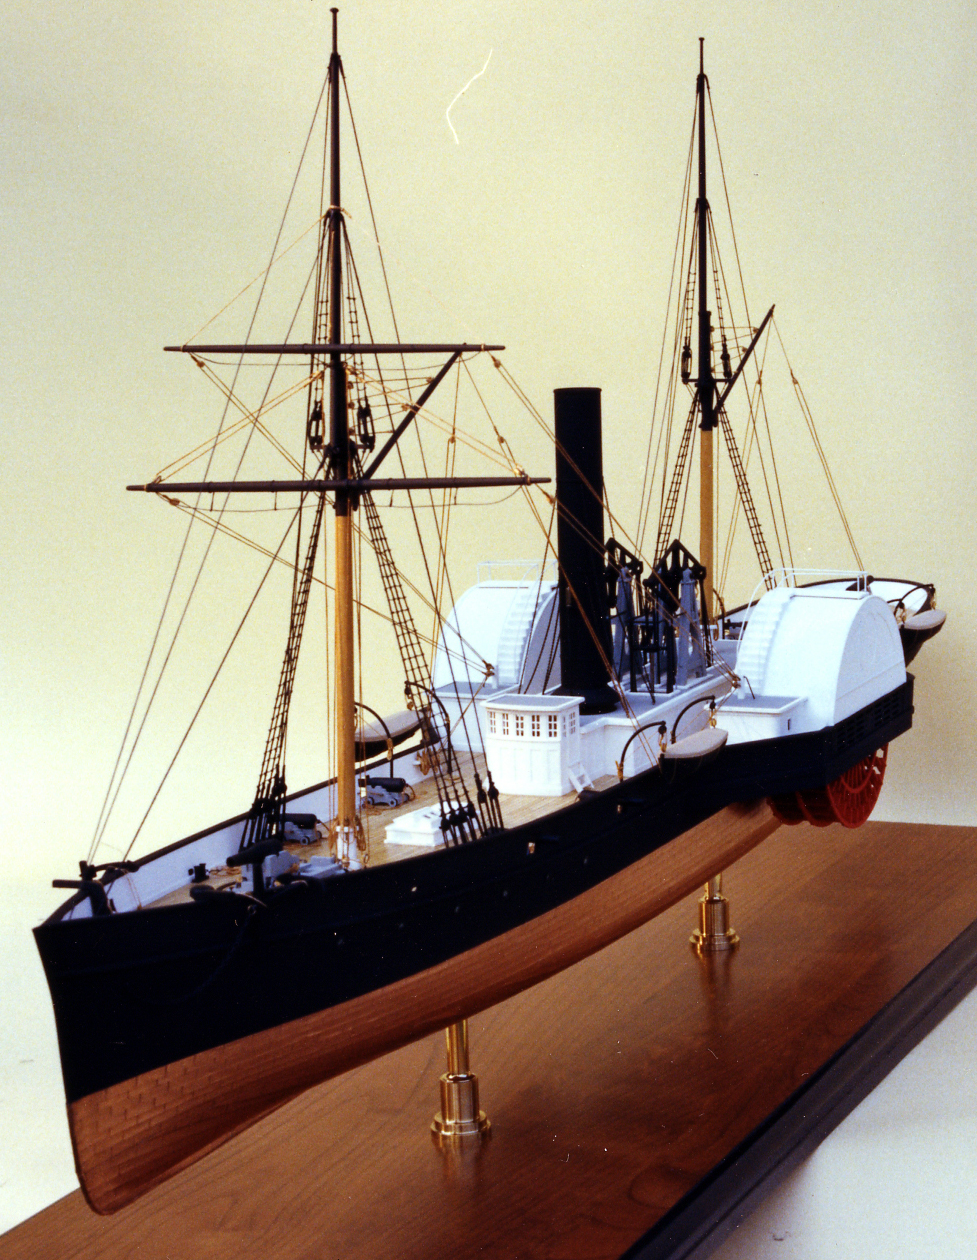 Model of the confederate side-wheel gunboat Patrick Henry - view from port bow